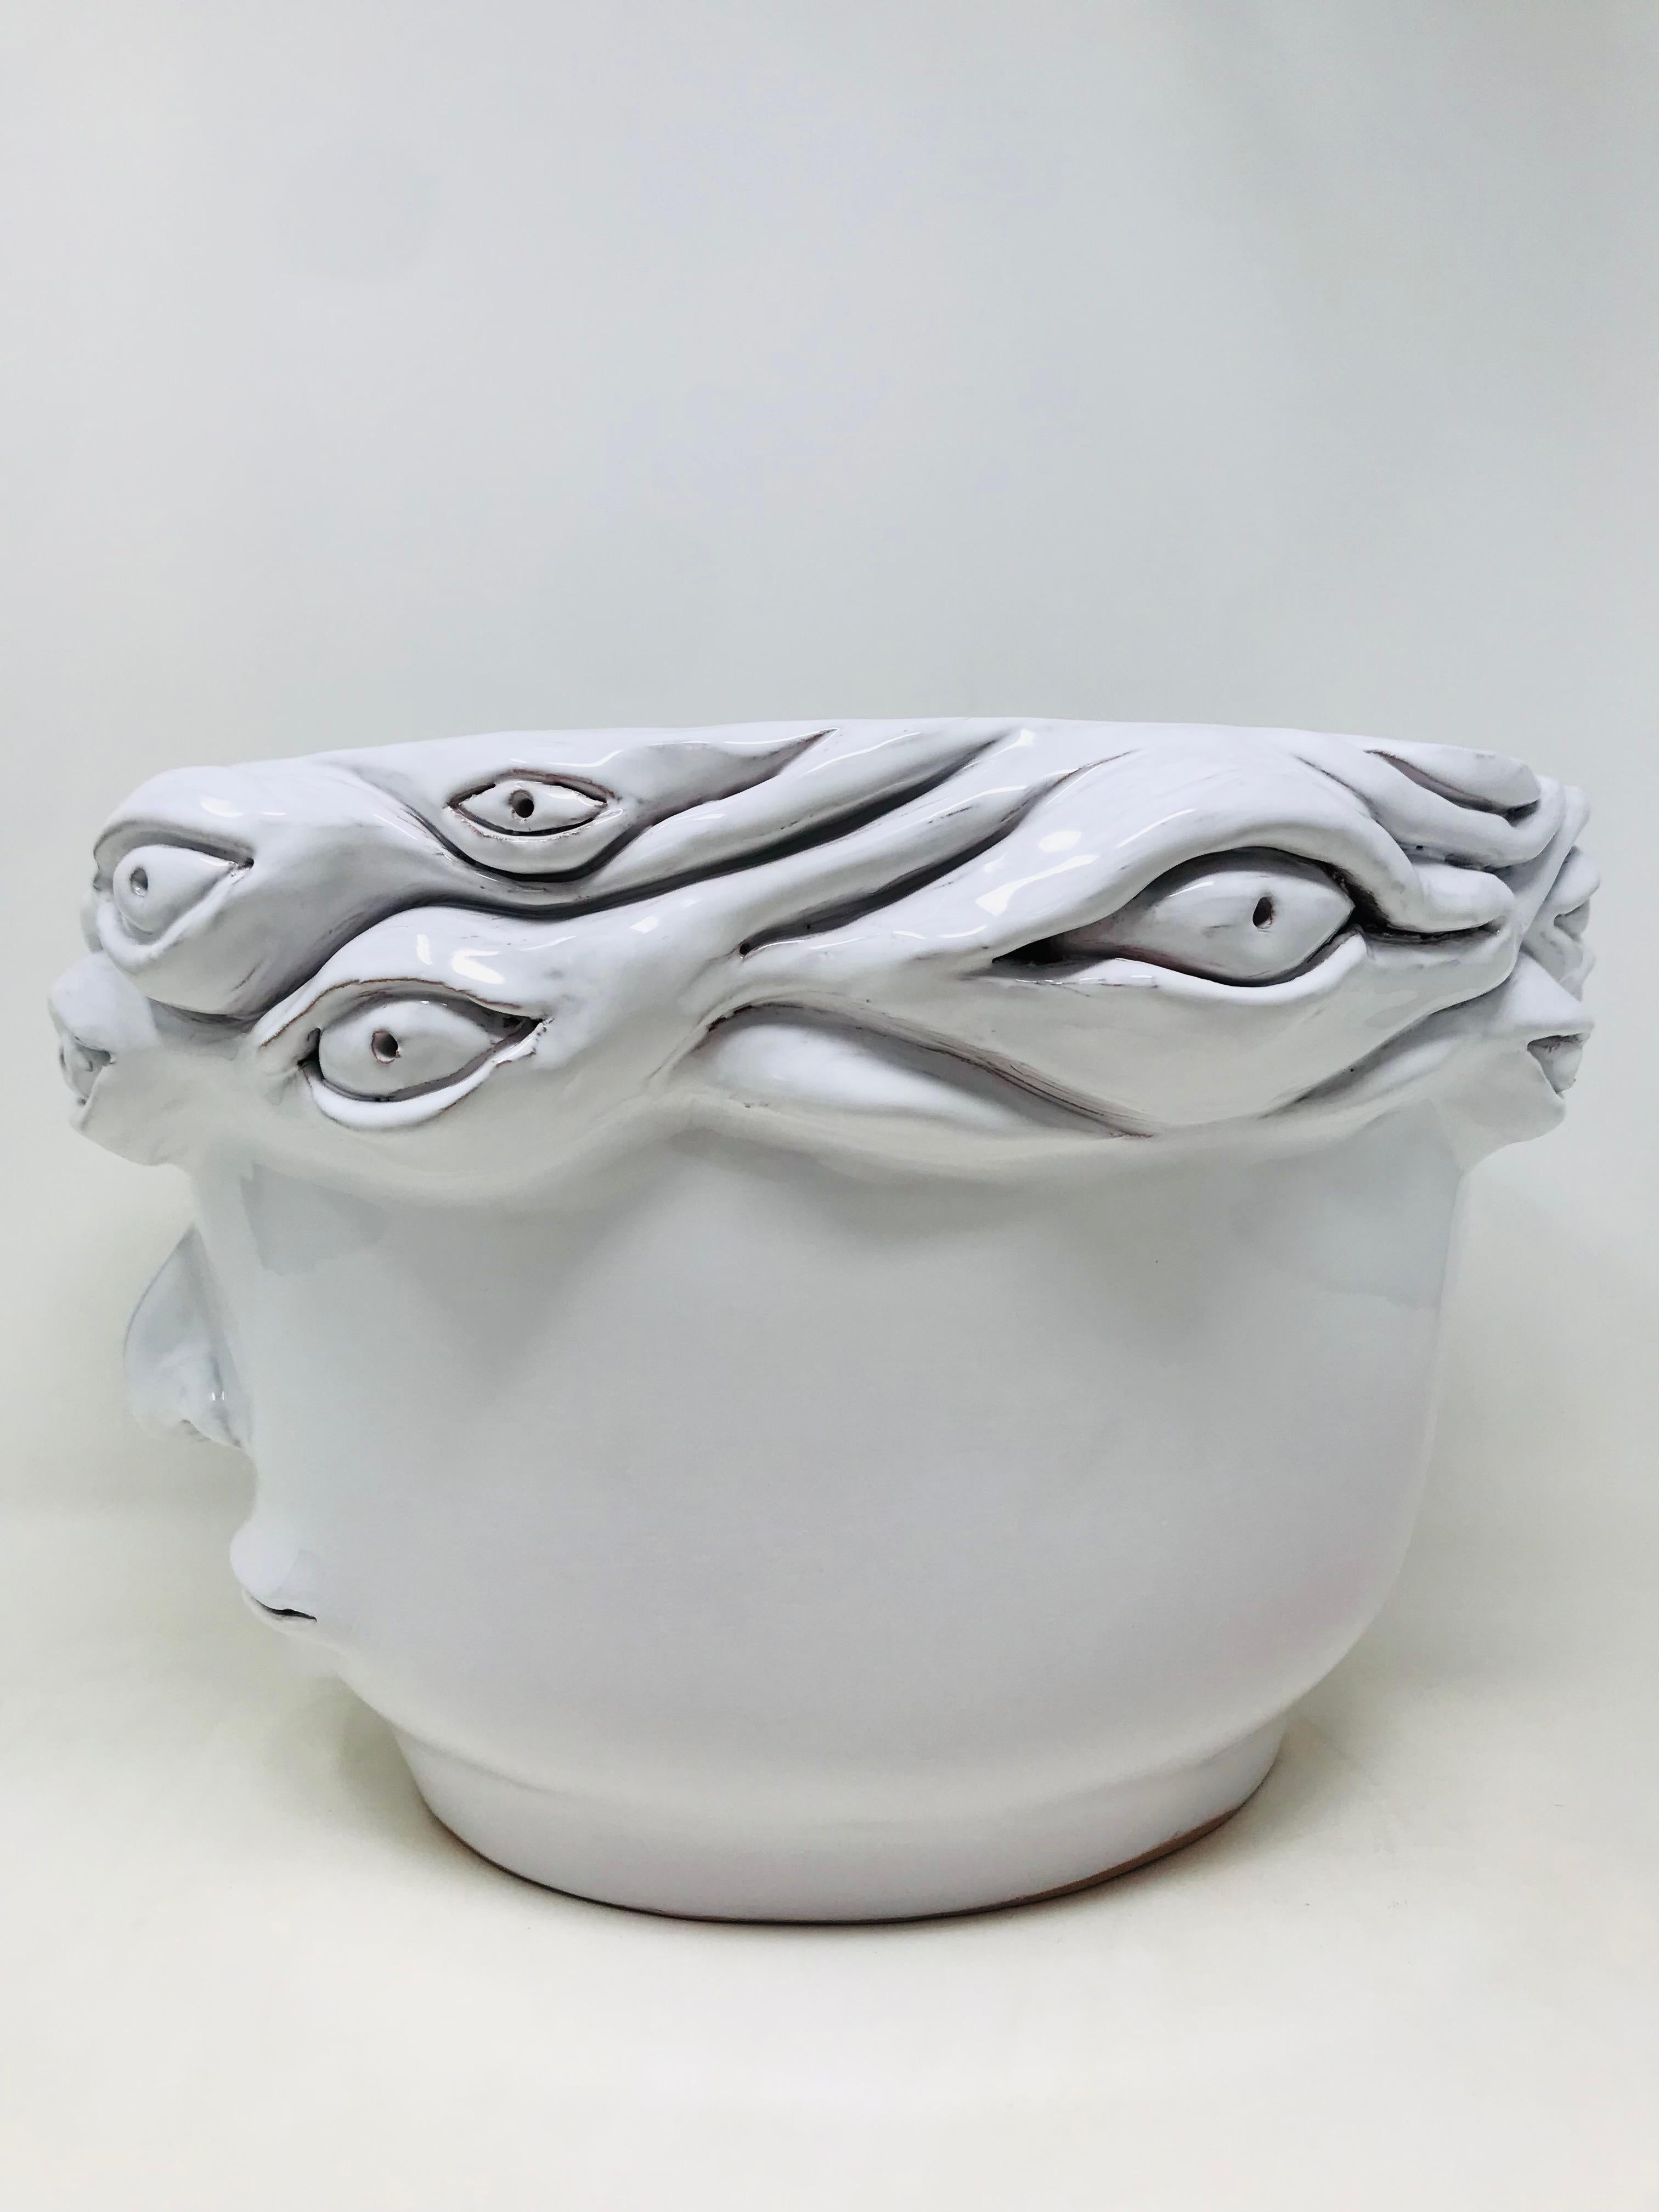 Contemporary Freaklab Vase Made Entirely by Hand in Ceramic, White Color For Sale